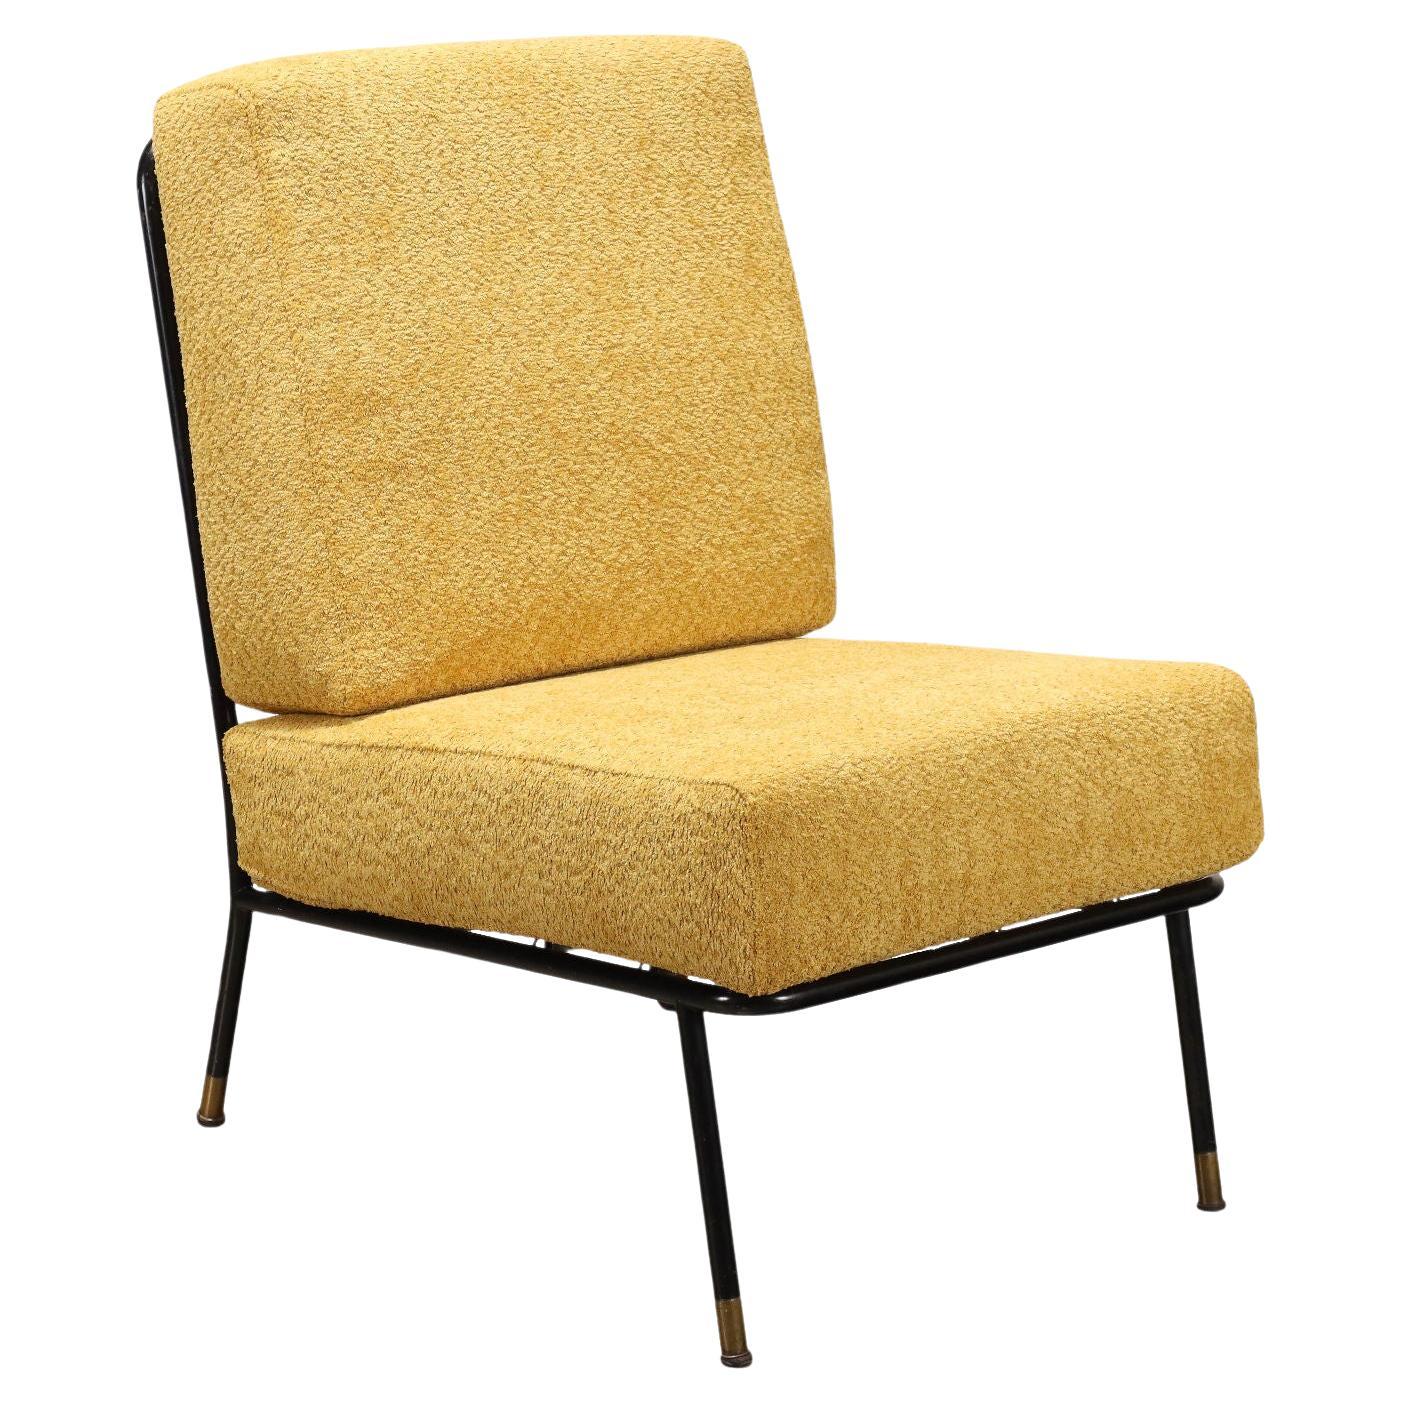 1960s armchair in ochre fabric For Sale